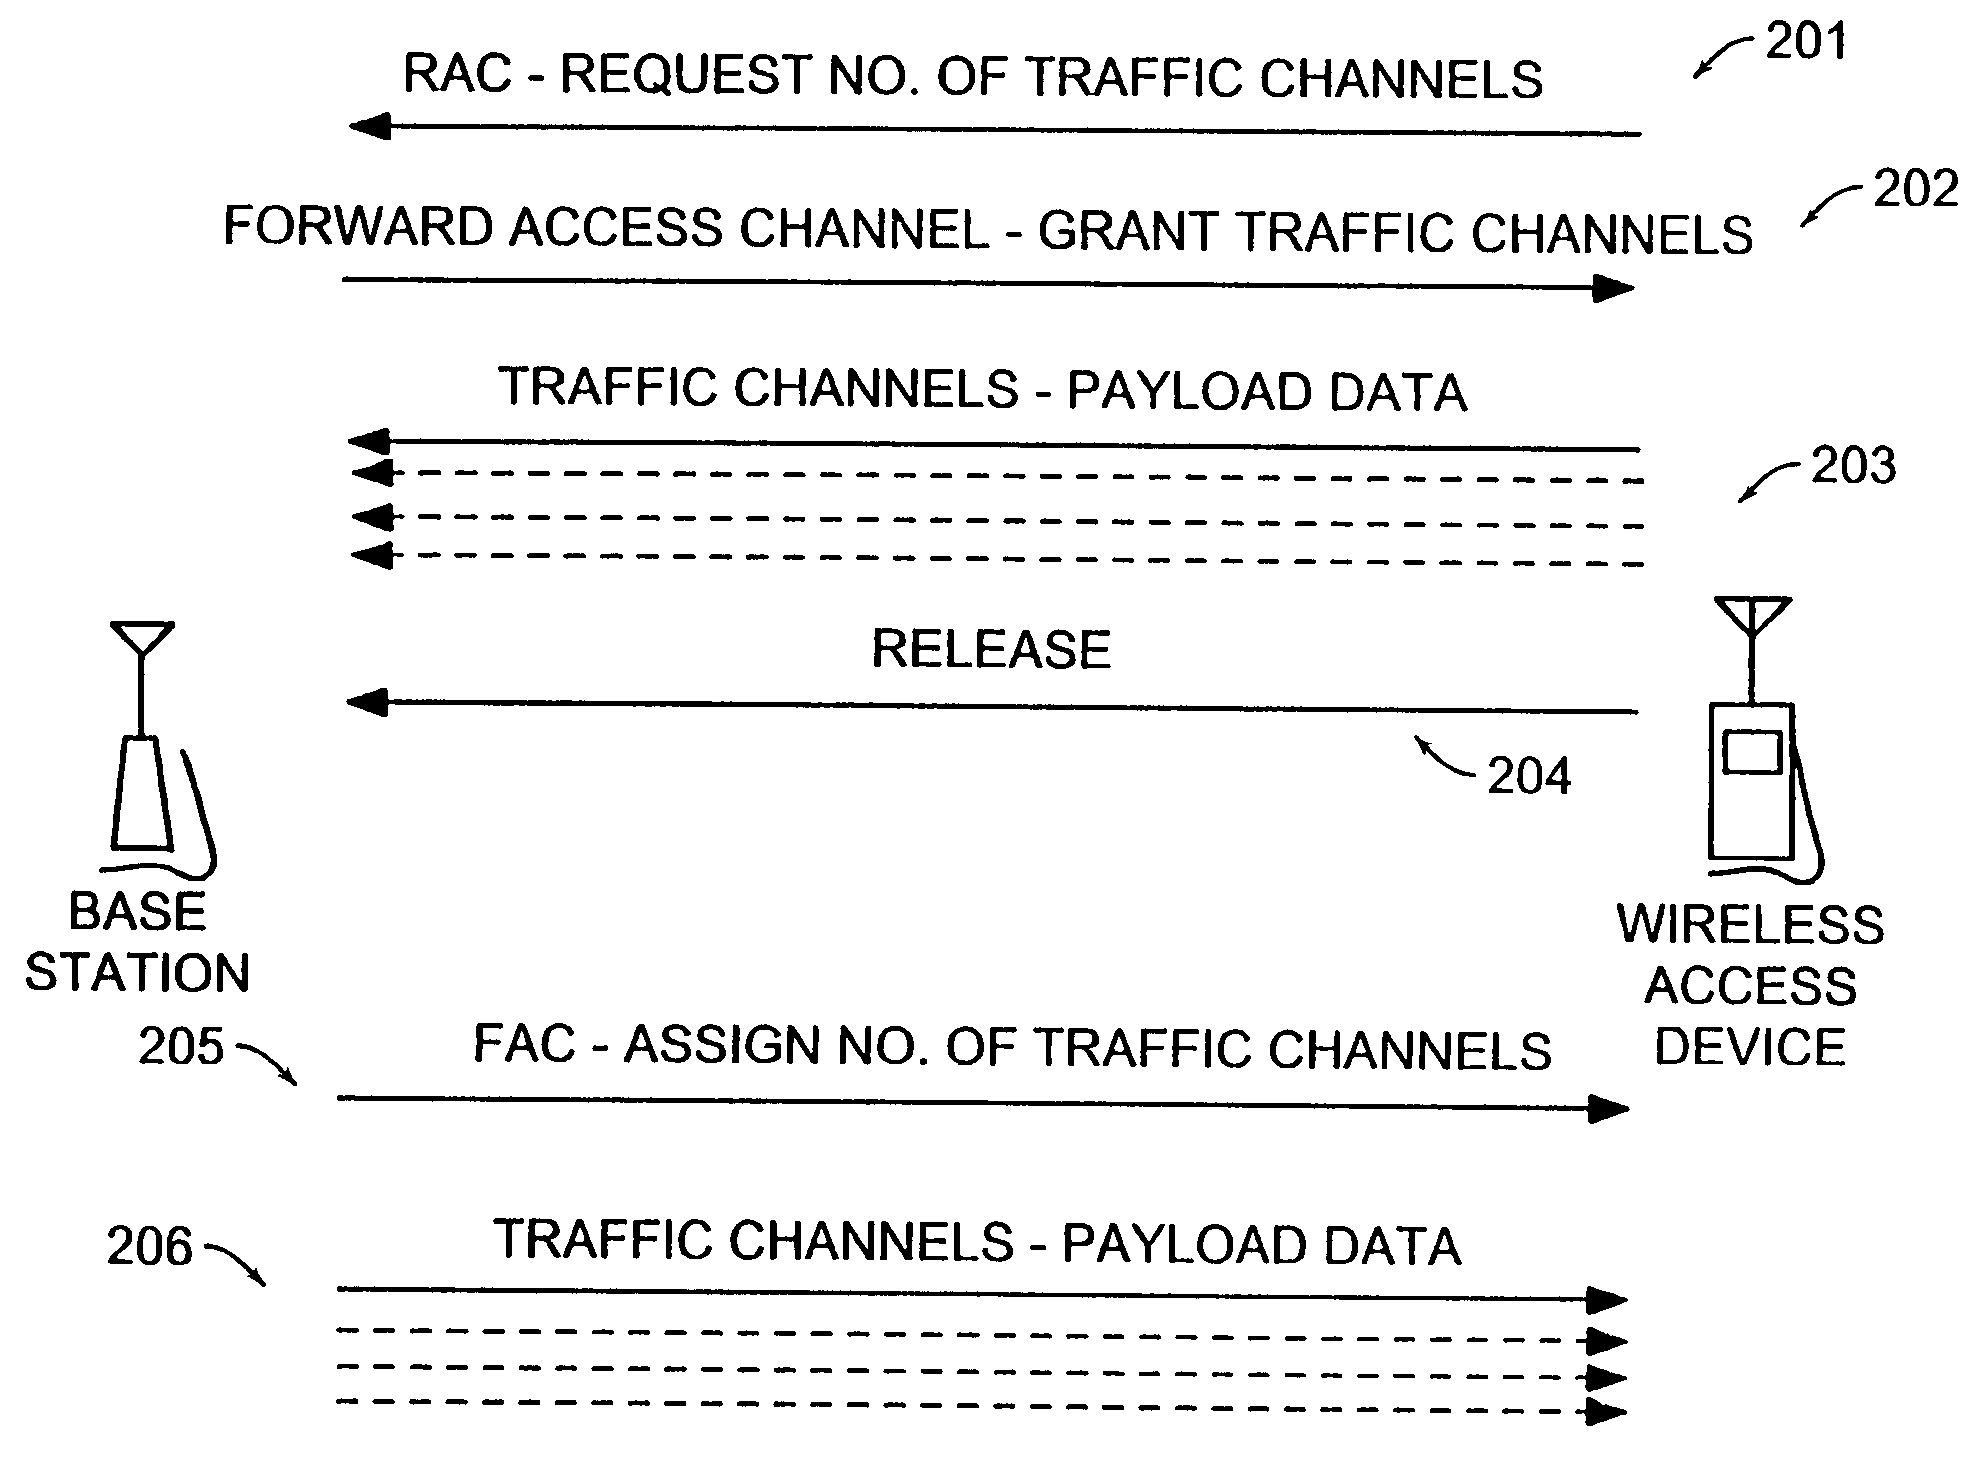 Maintenance of channel usage in a wireless communication system